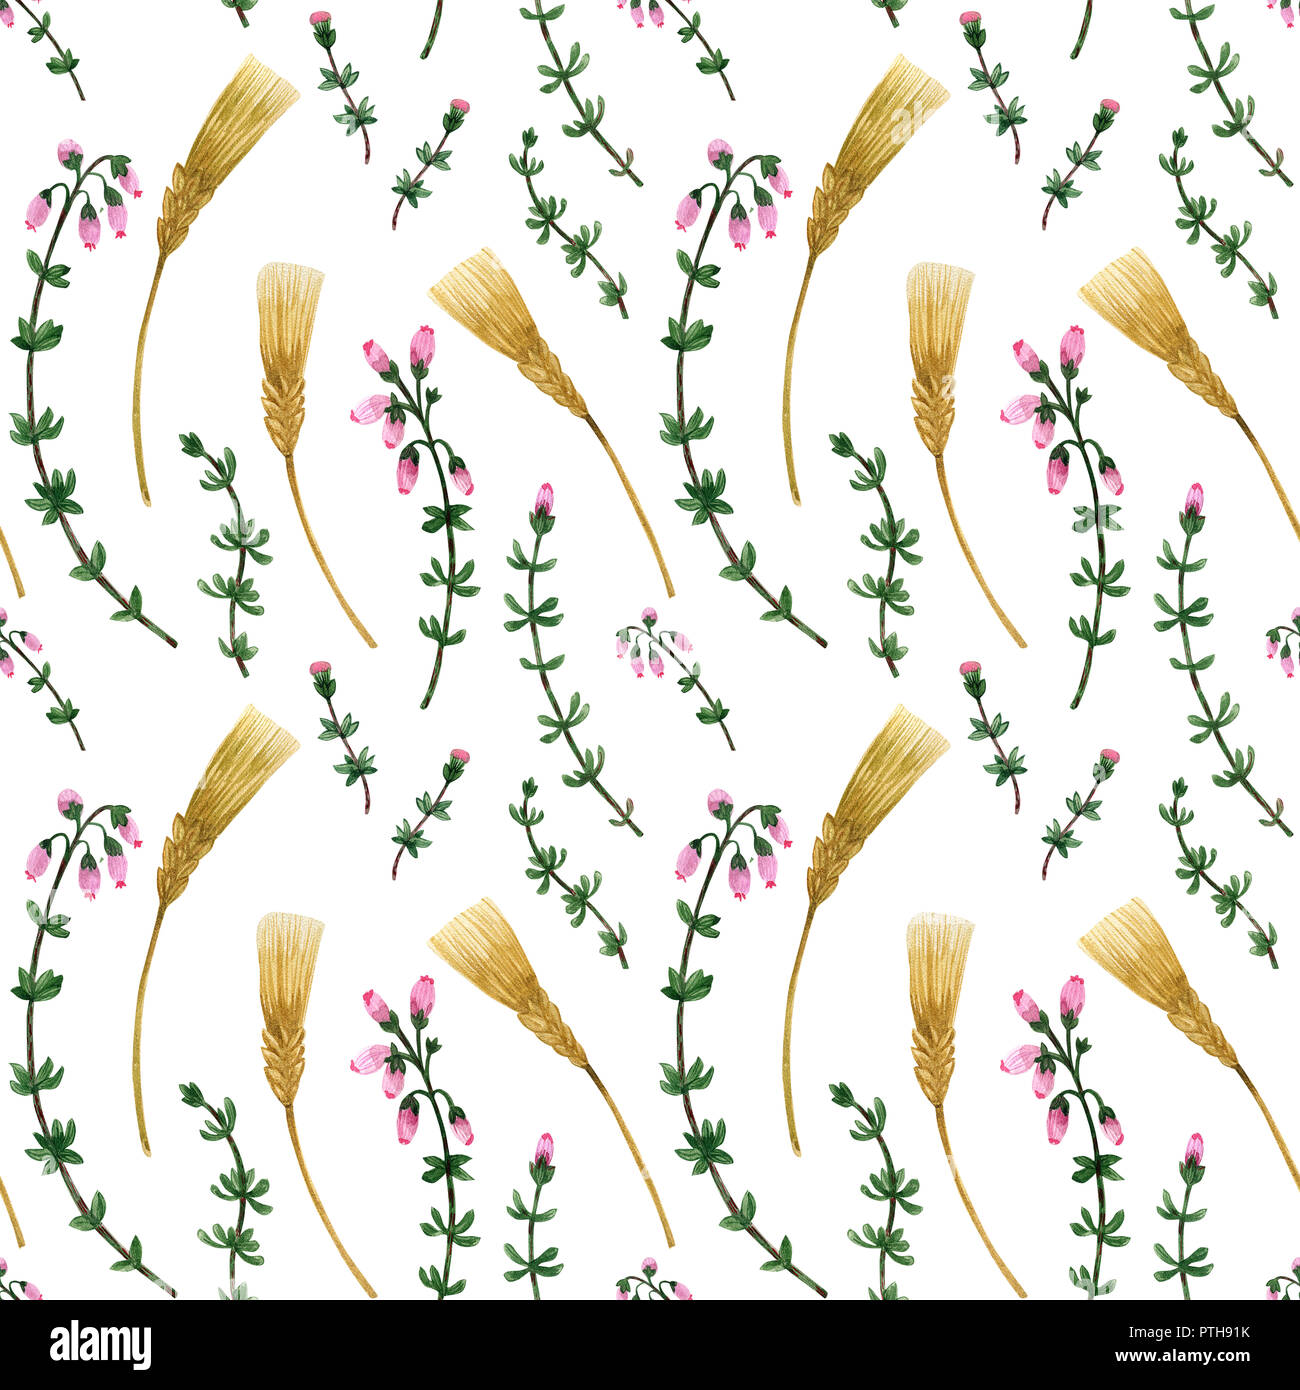 Wild plants of Scotland seamless pattern. Heather and barley. Watercolor on a white background, path included Stock Photo